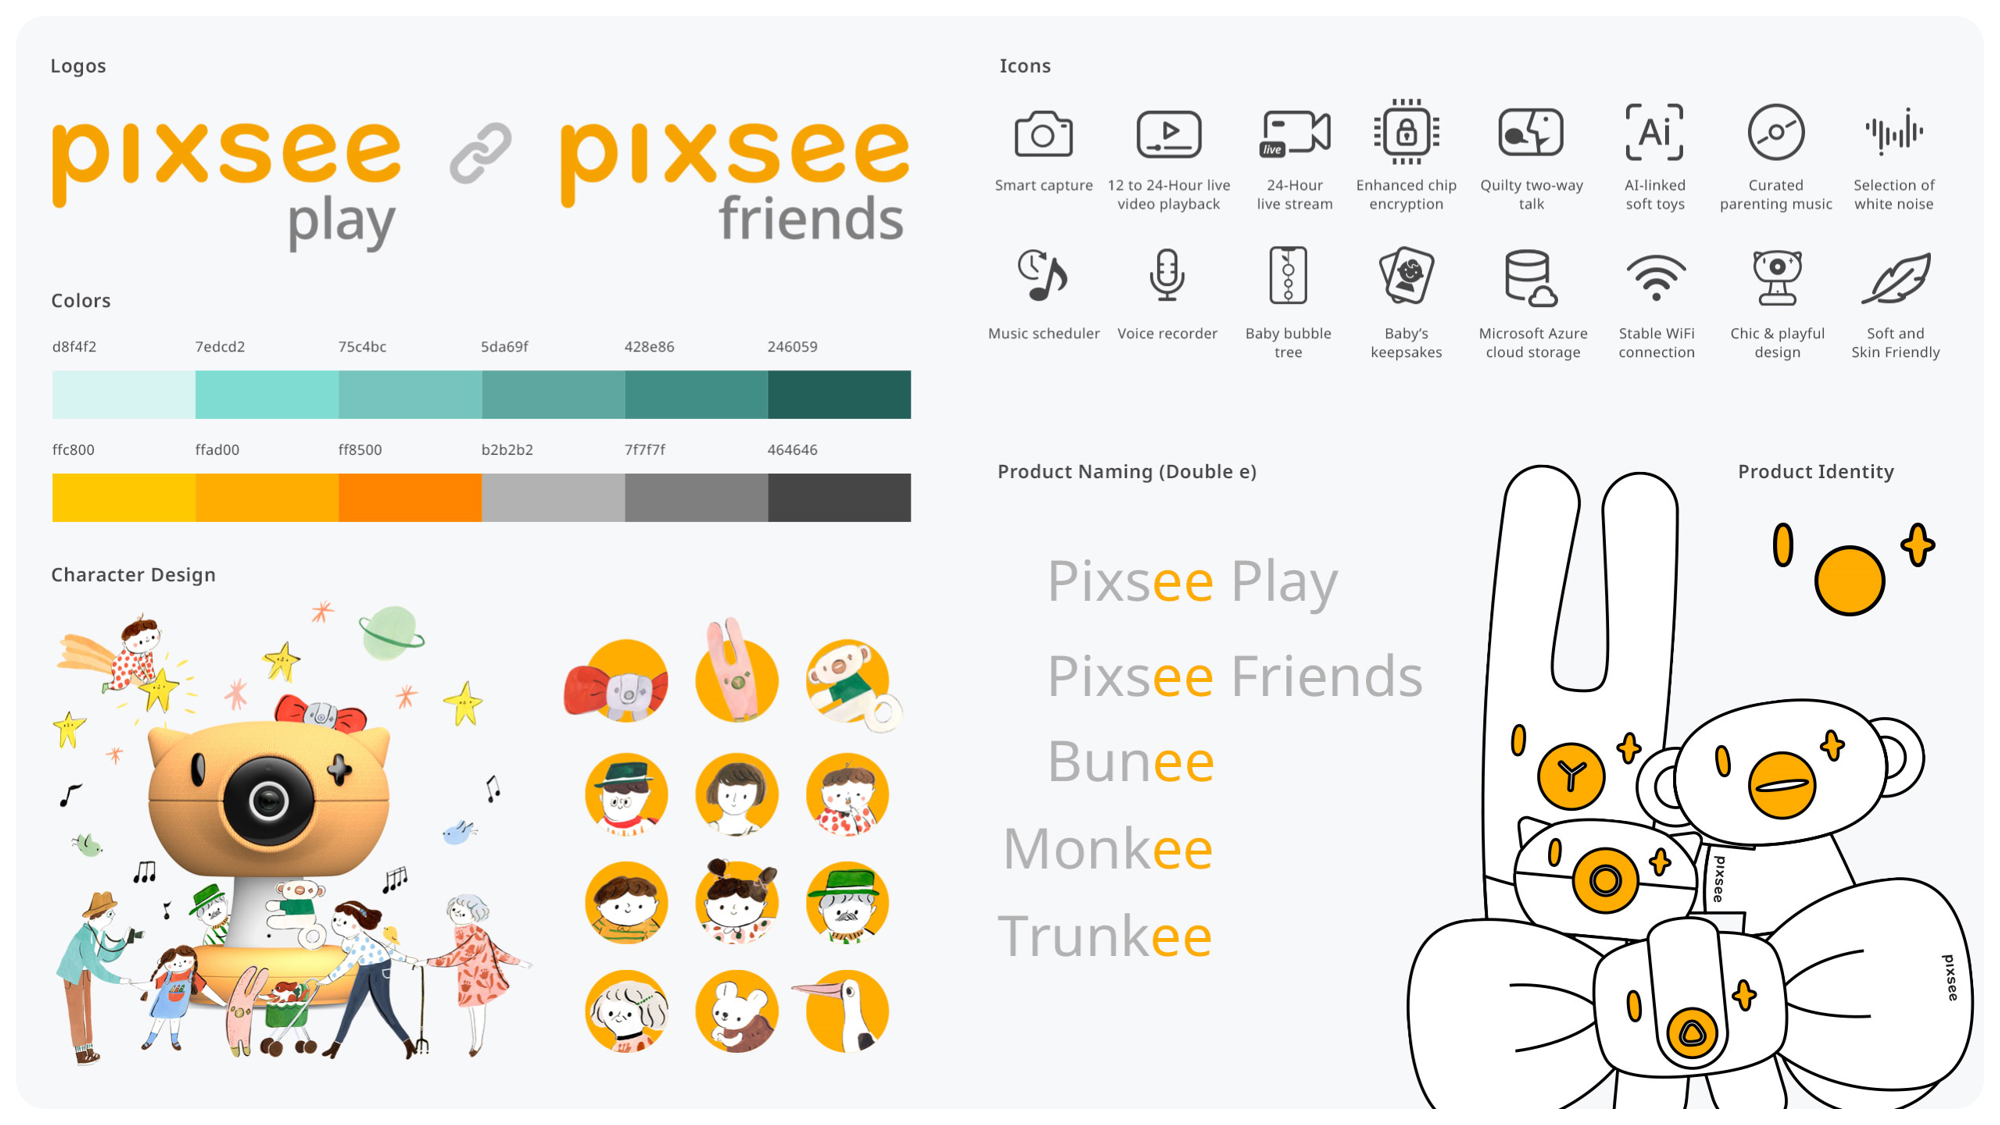 Pixsee Play & its cuddly companions Pixsee Friends